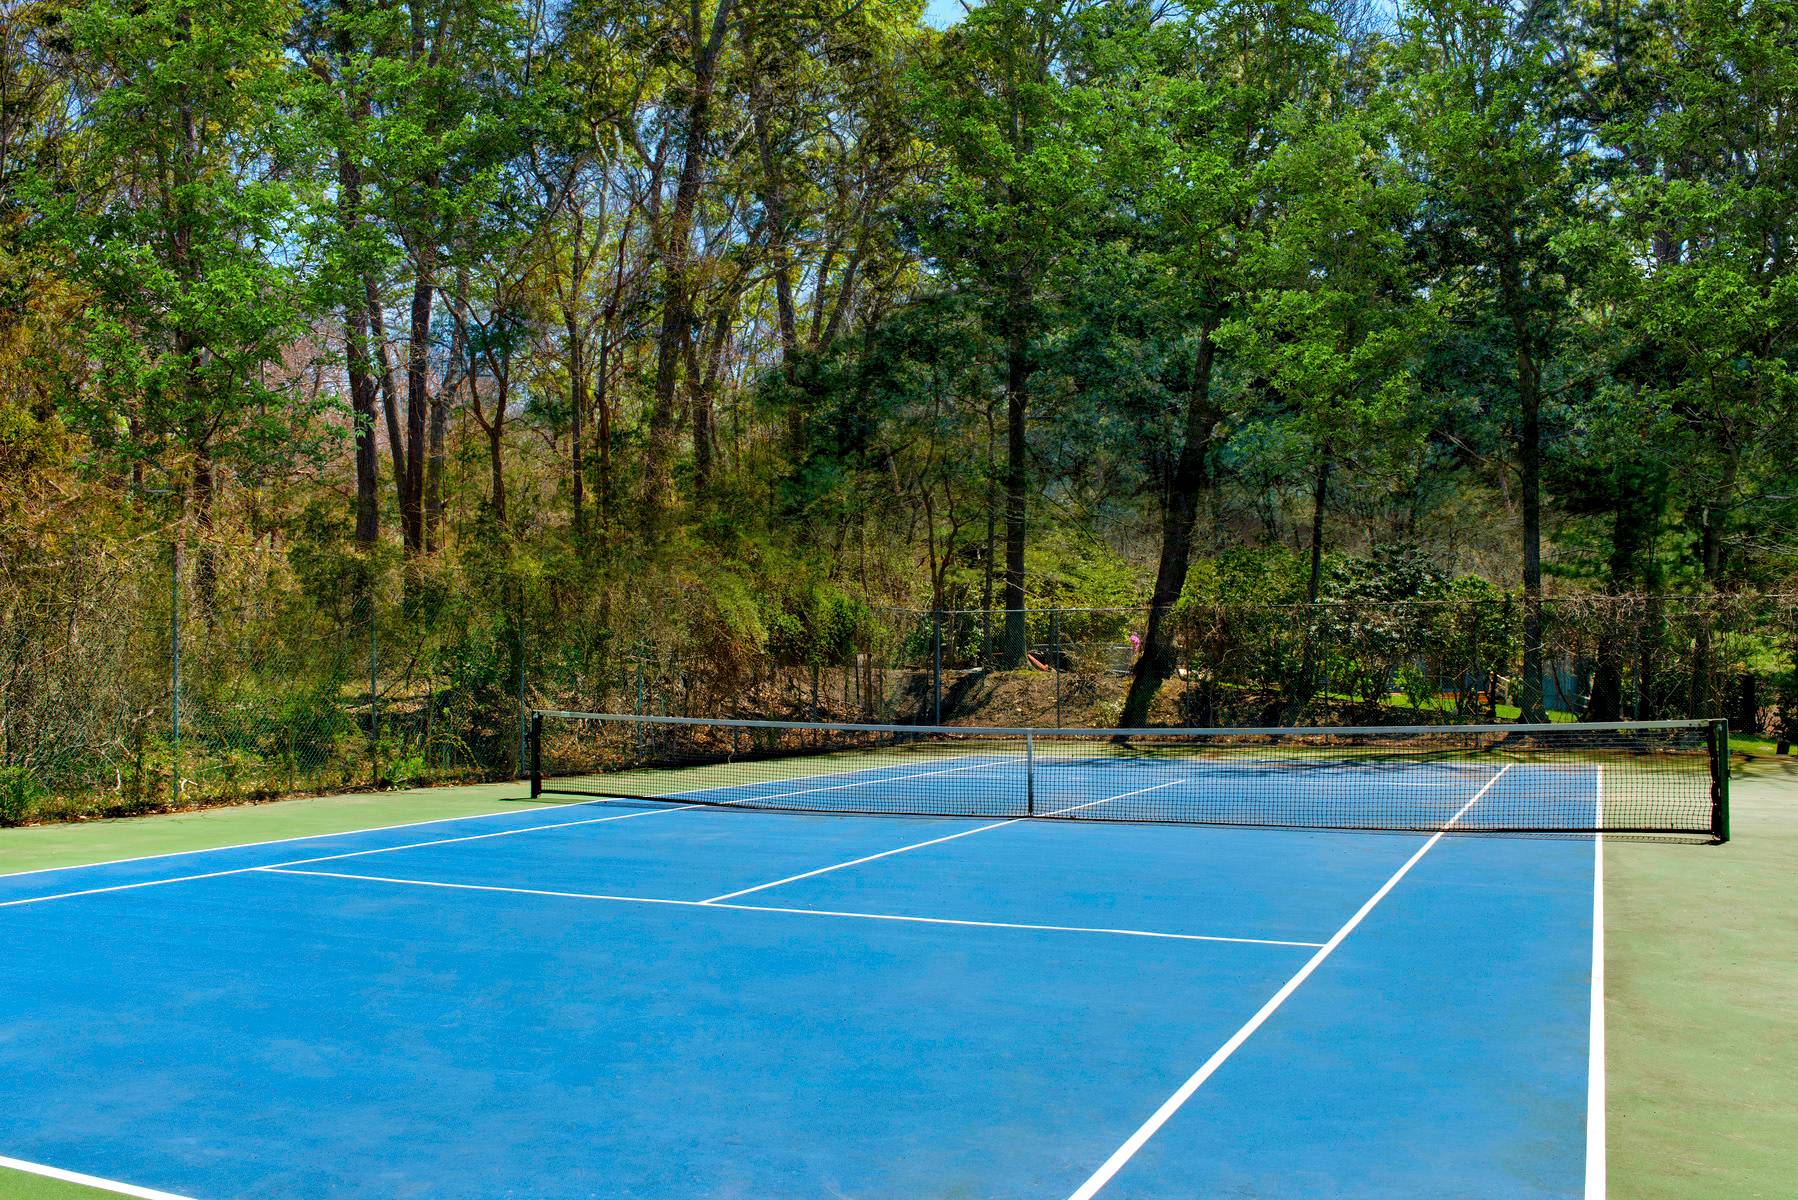 a view of an outdoor space and tennis court